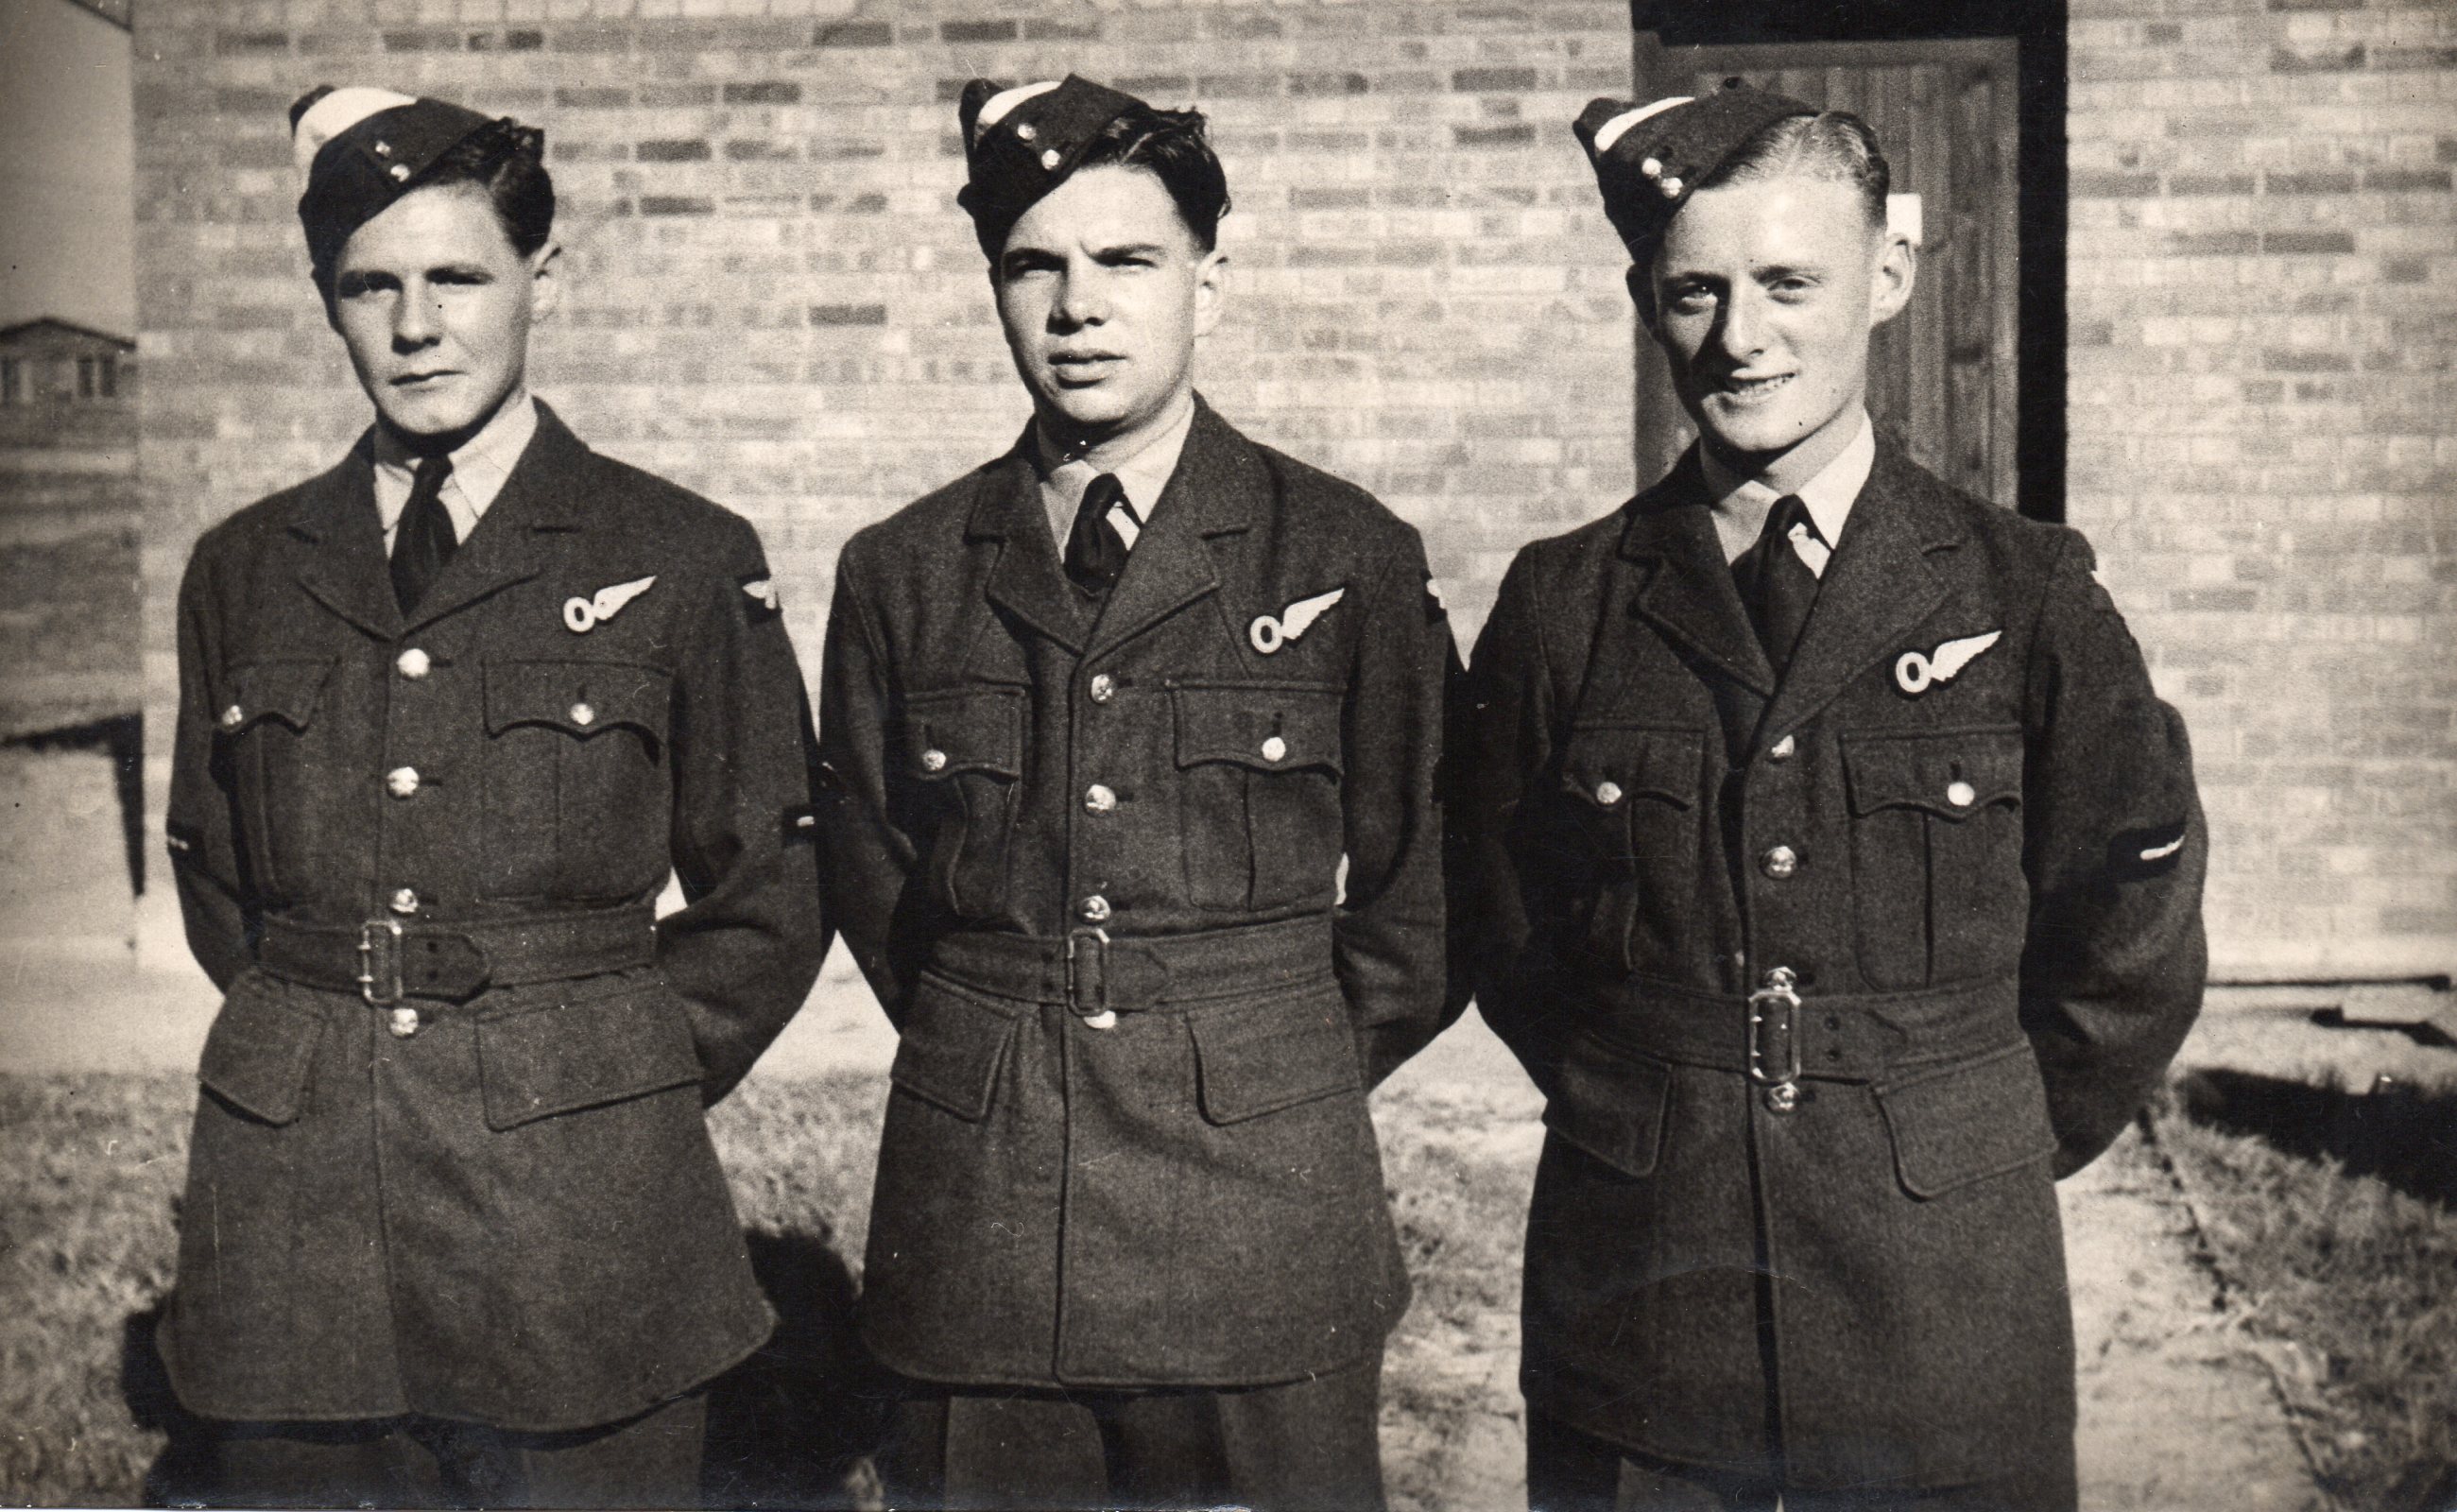 Groups of 3 airmen, J C McGhee at right